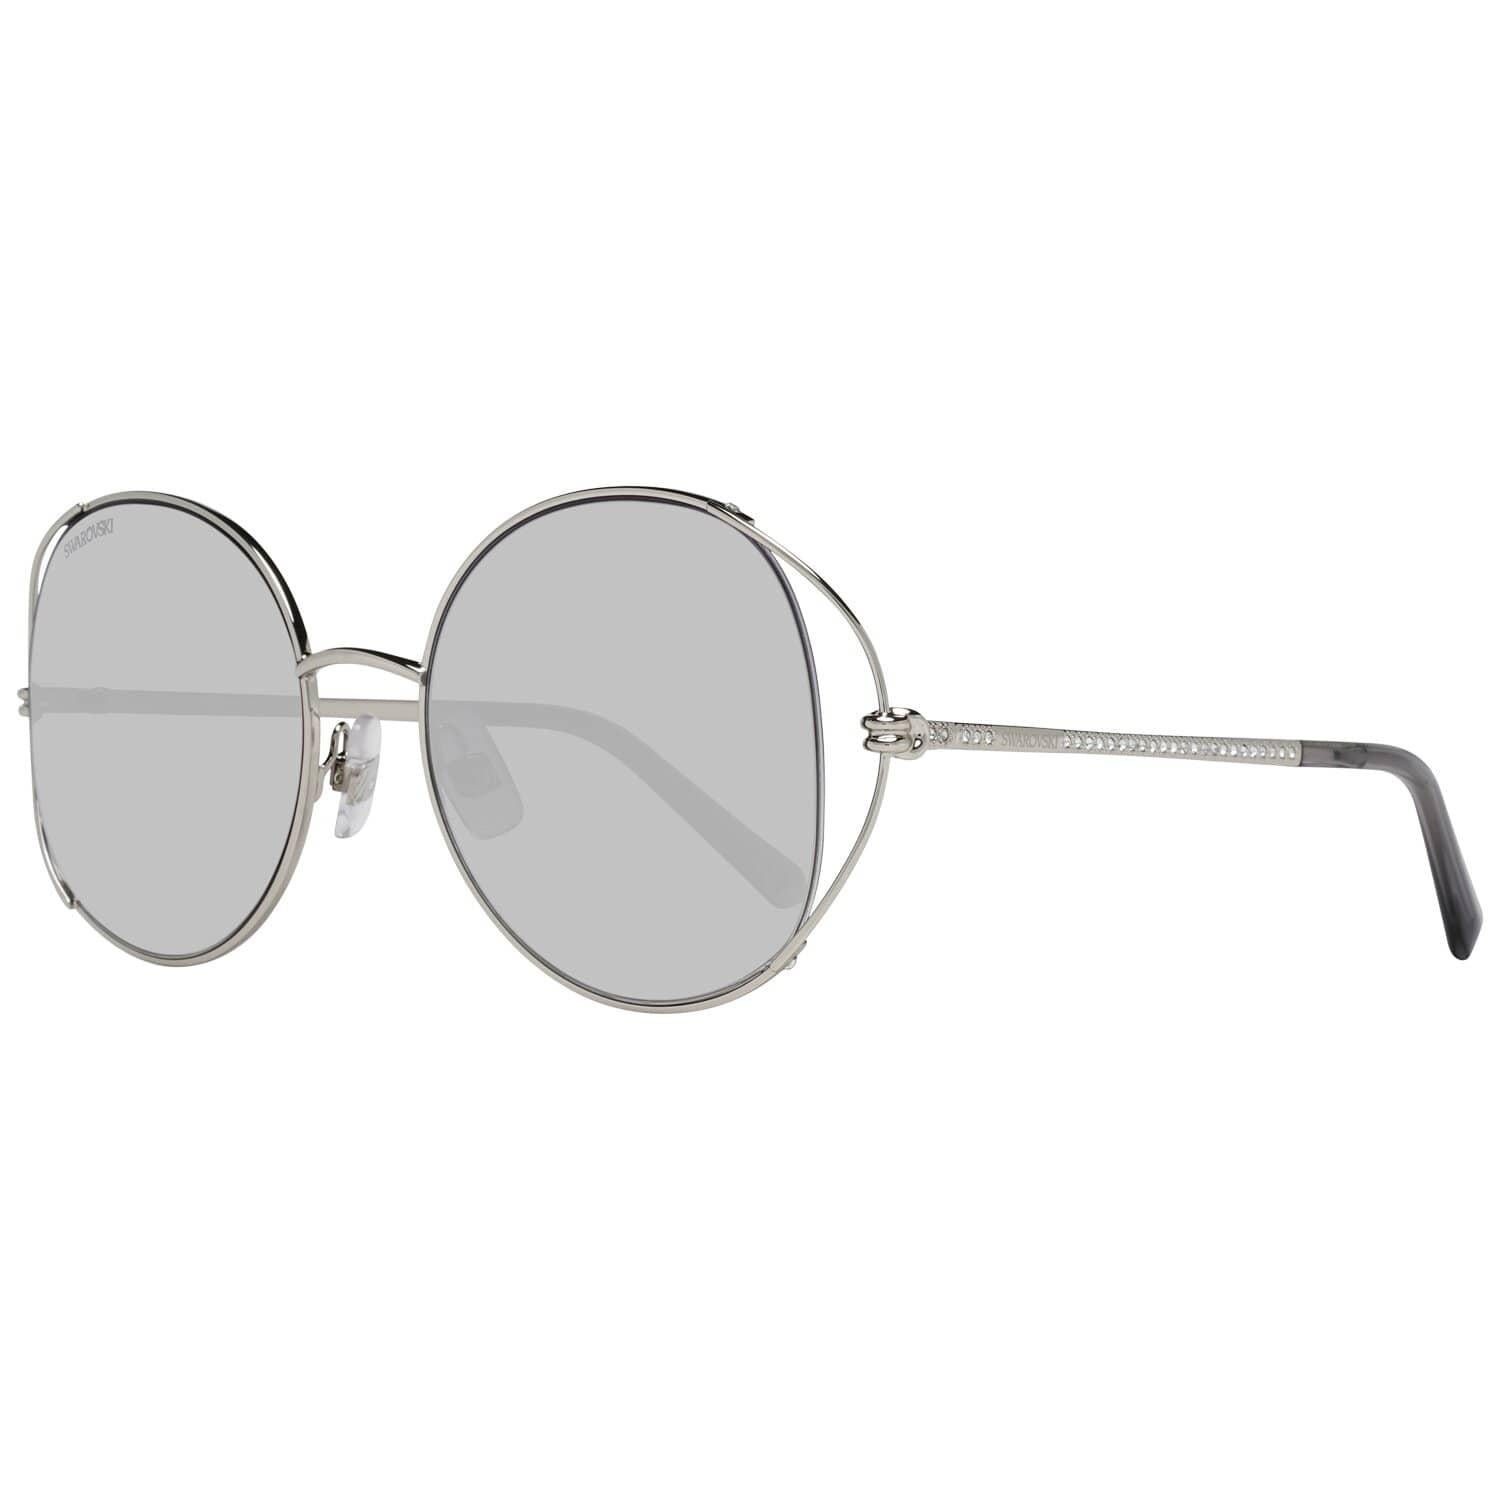 DetailsMATERIAL: MetalCOLOR: SilverMODEL: SK0230 5416BGENDER: WomenCOUNTRY OF MANUFACTURE: ChinaTYPE: SunglassesORIGINAL CASE?: YesSTYLE: OvalOCCASION: CasualFEATURES: LightweightLENS COLOR: GreyLENS TECHNOLOGY: GradientYEAR MANUFACTURED: